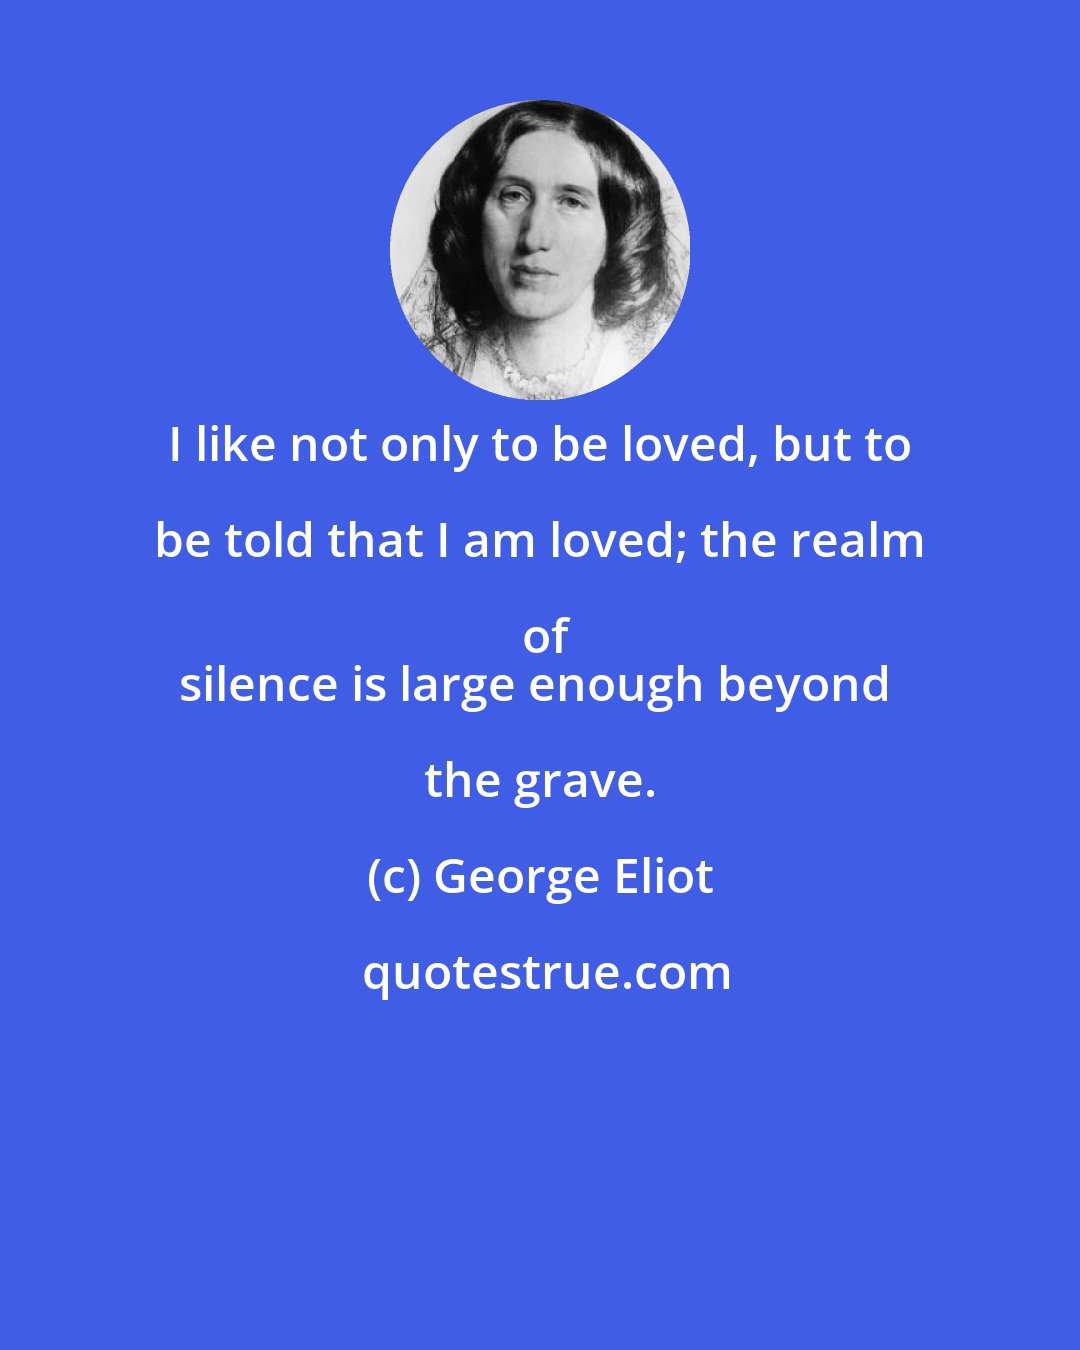 George Eliot: I like not only to be loved, but to be told that I am loved; the realm of
silence is large enough beyond the grave.